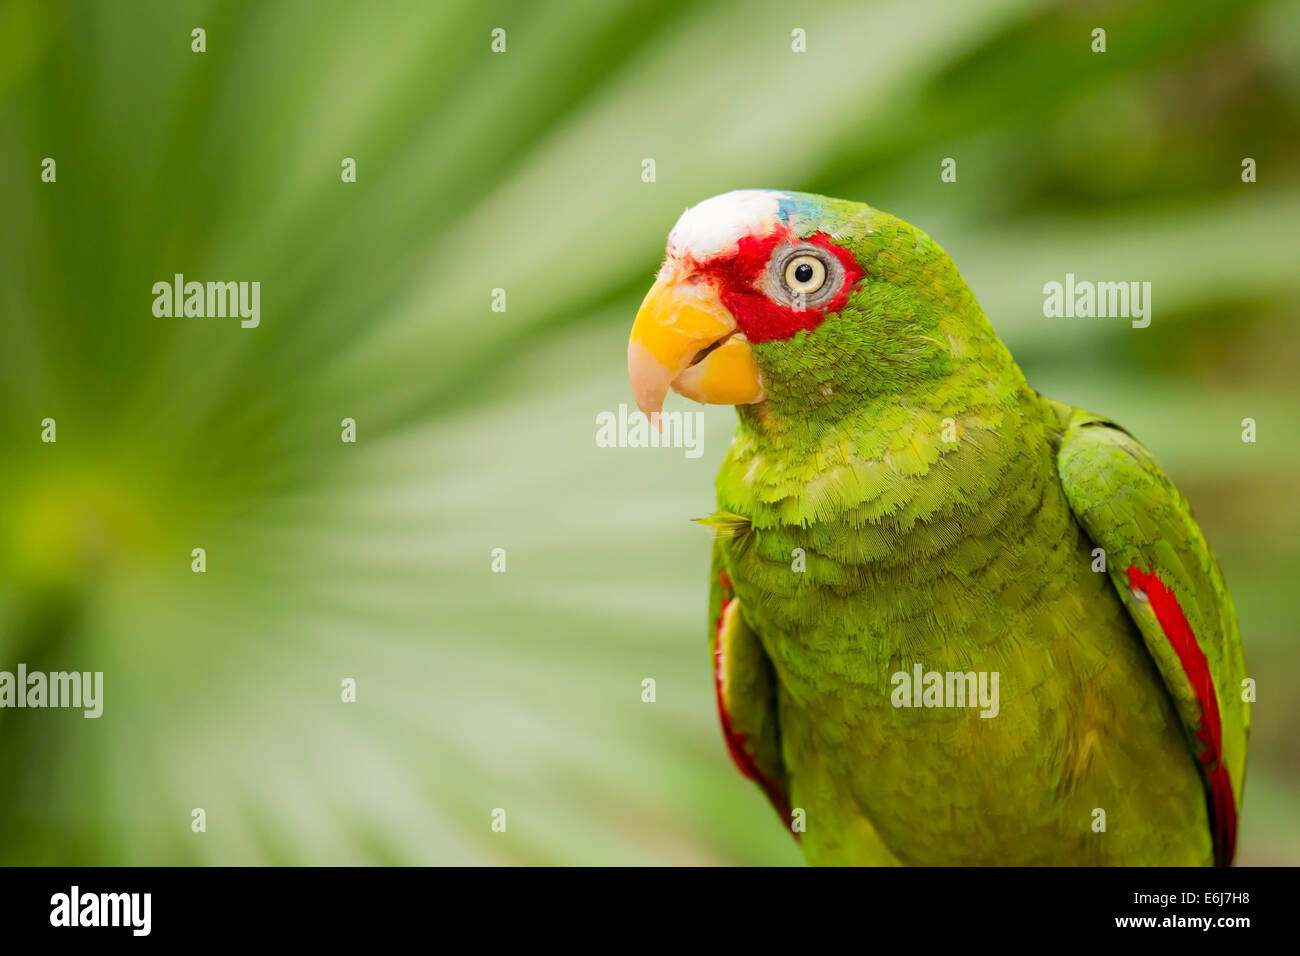 Portrait of colorful White-fronted Parrot in Mexico Stock Photo